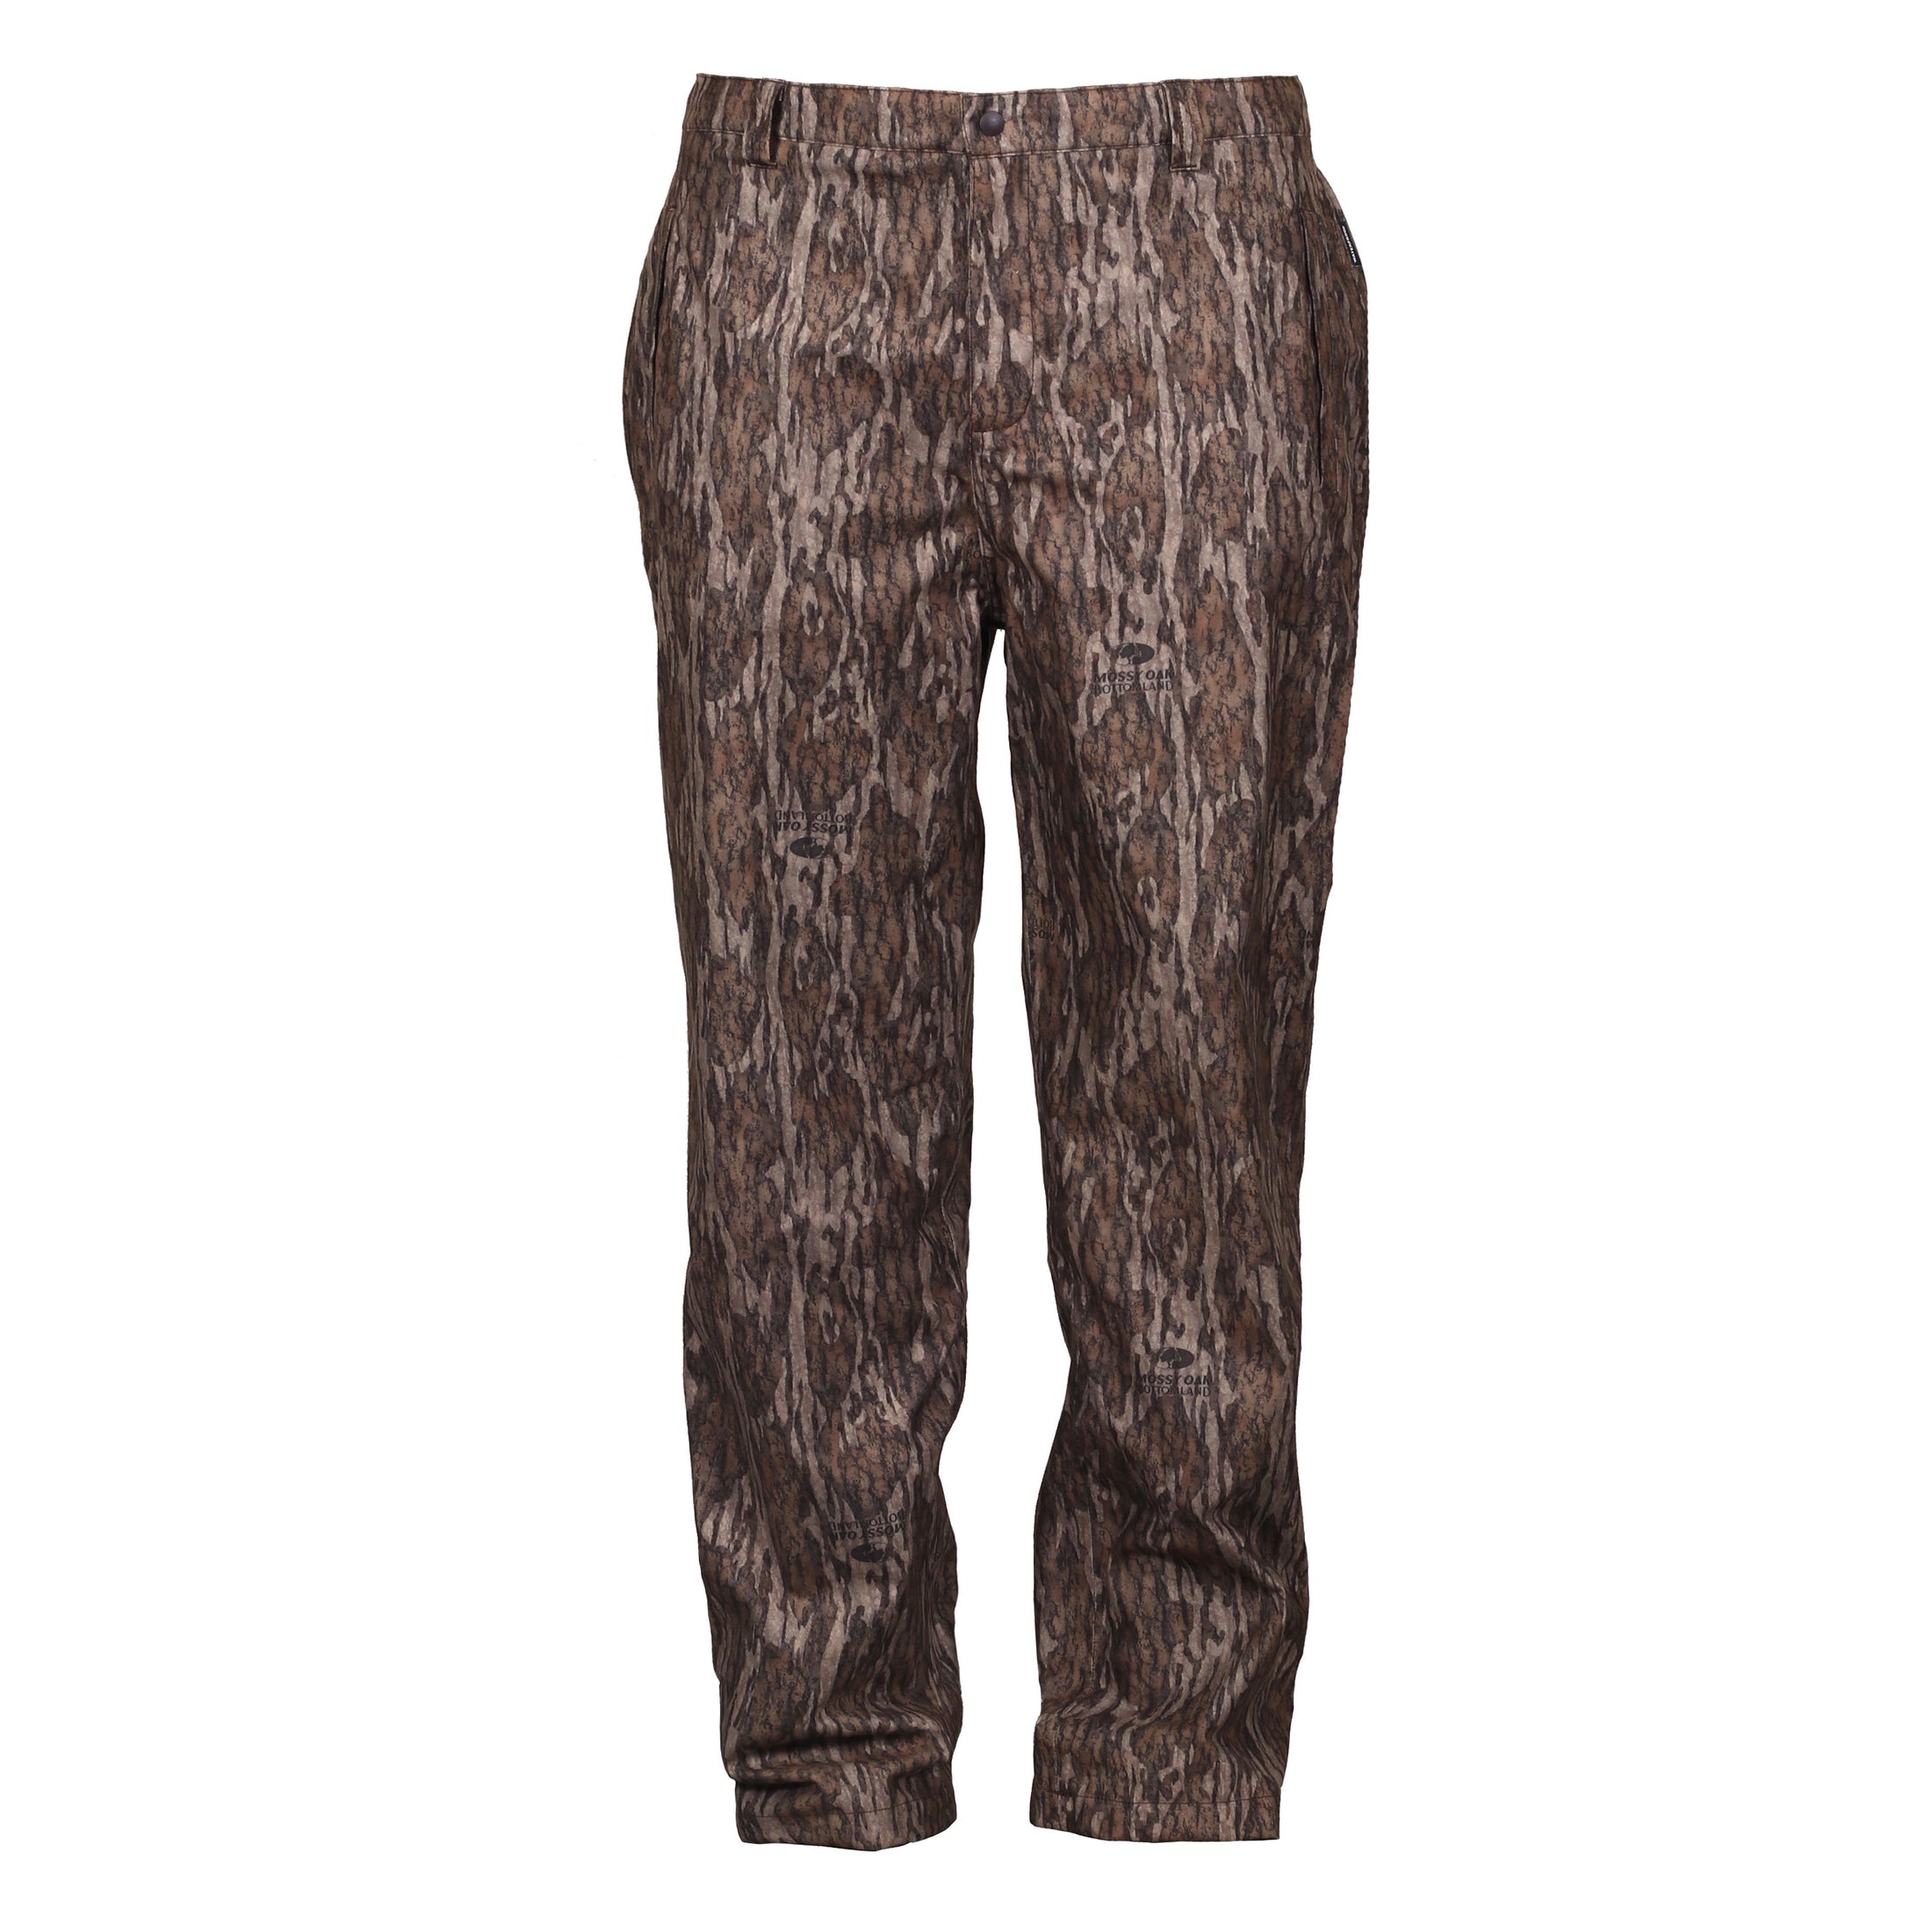 gamehide trails end pant (mossy oak new bottomland)